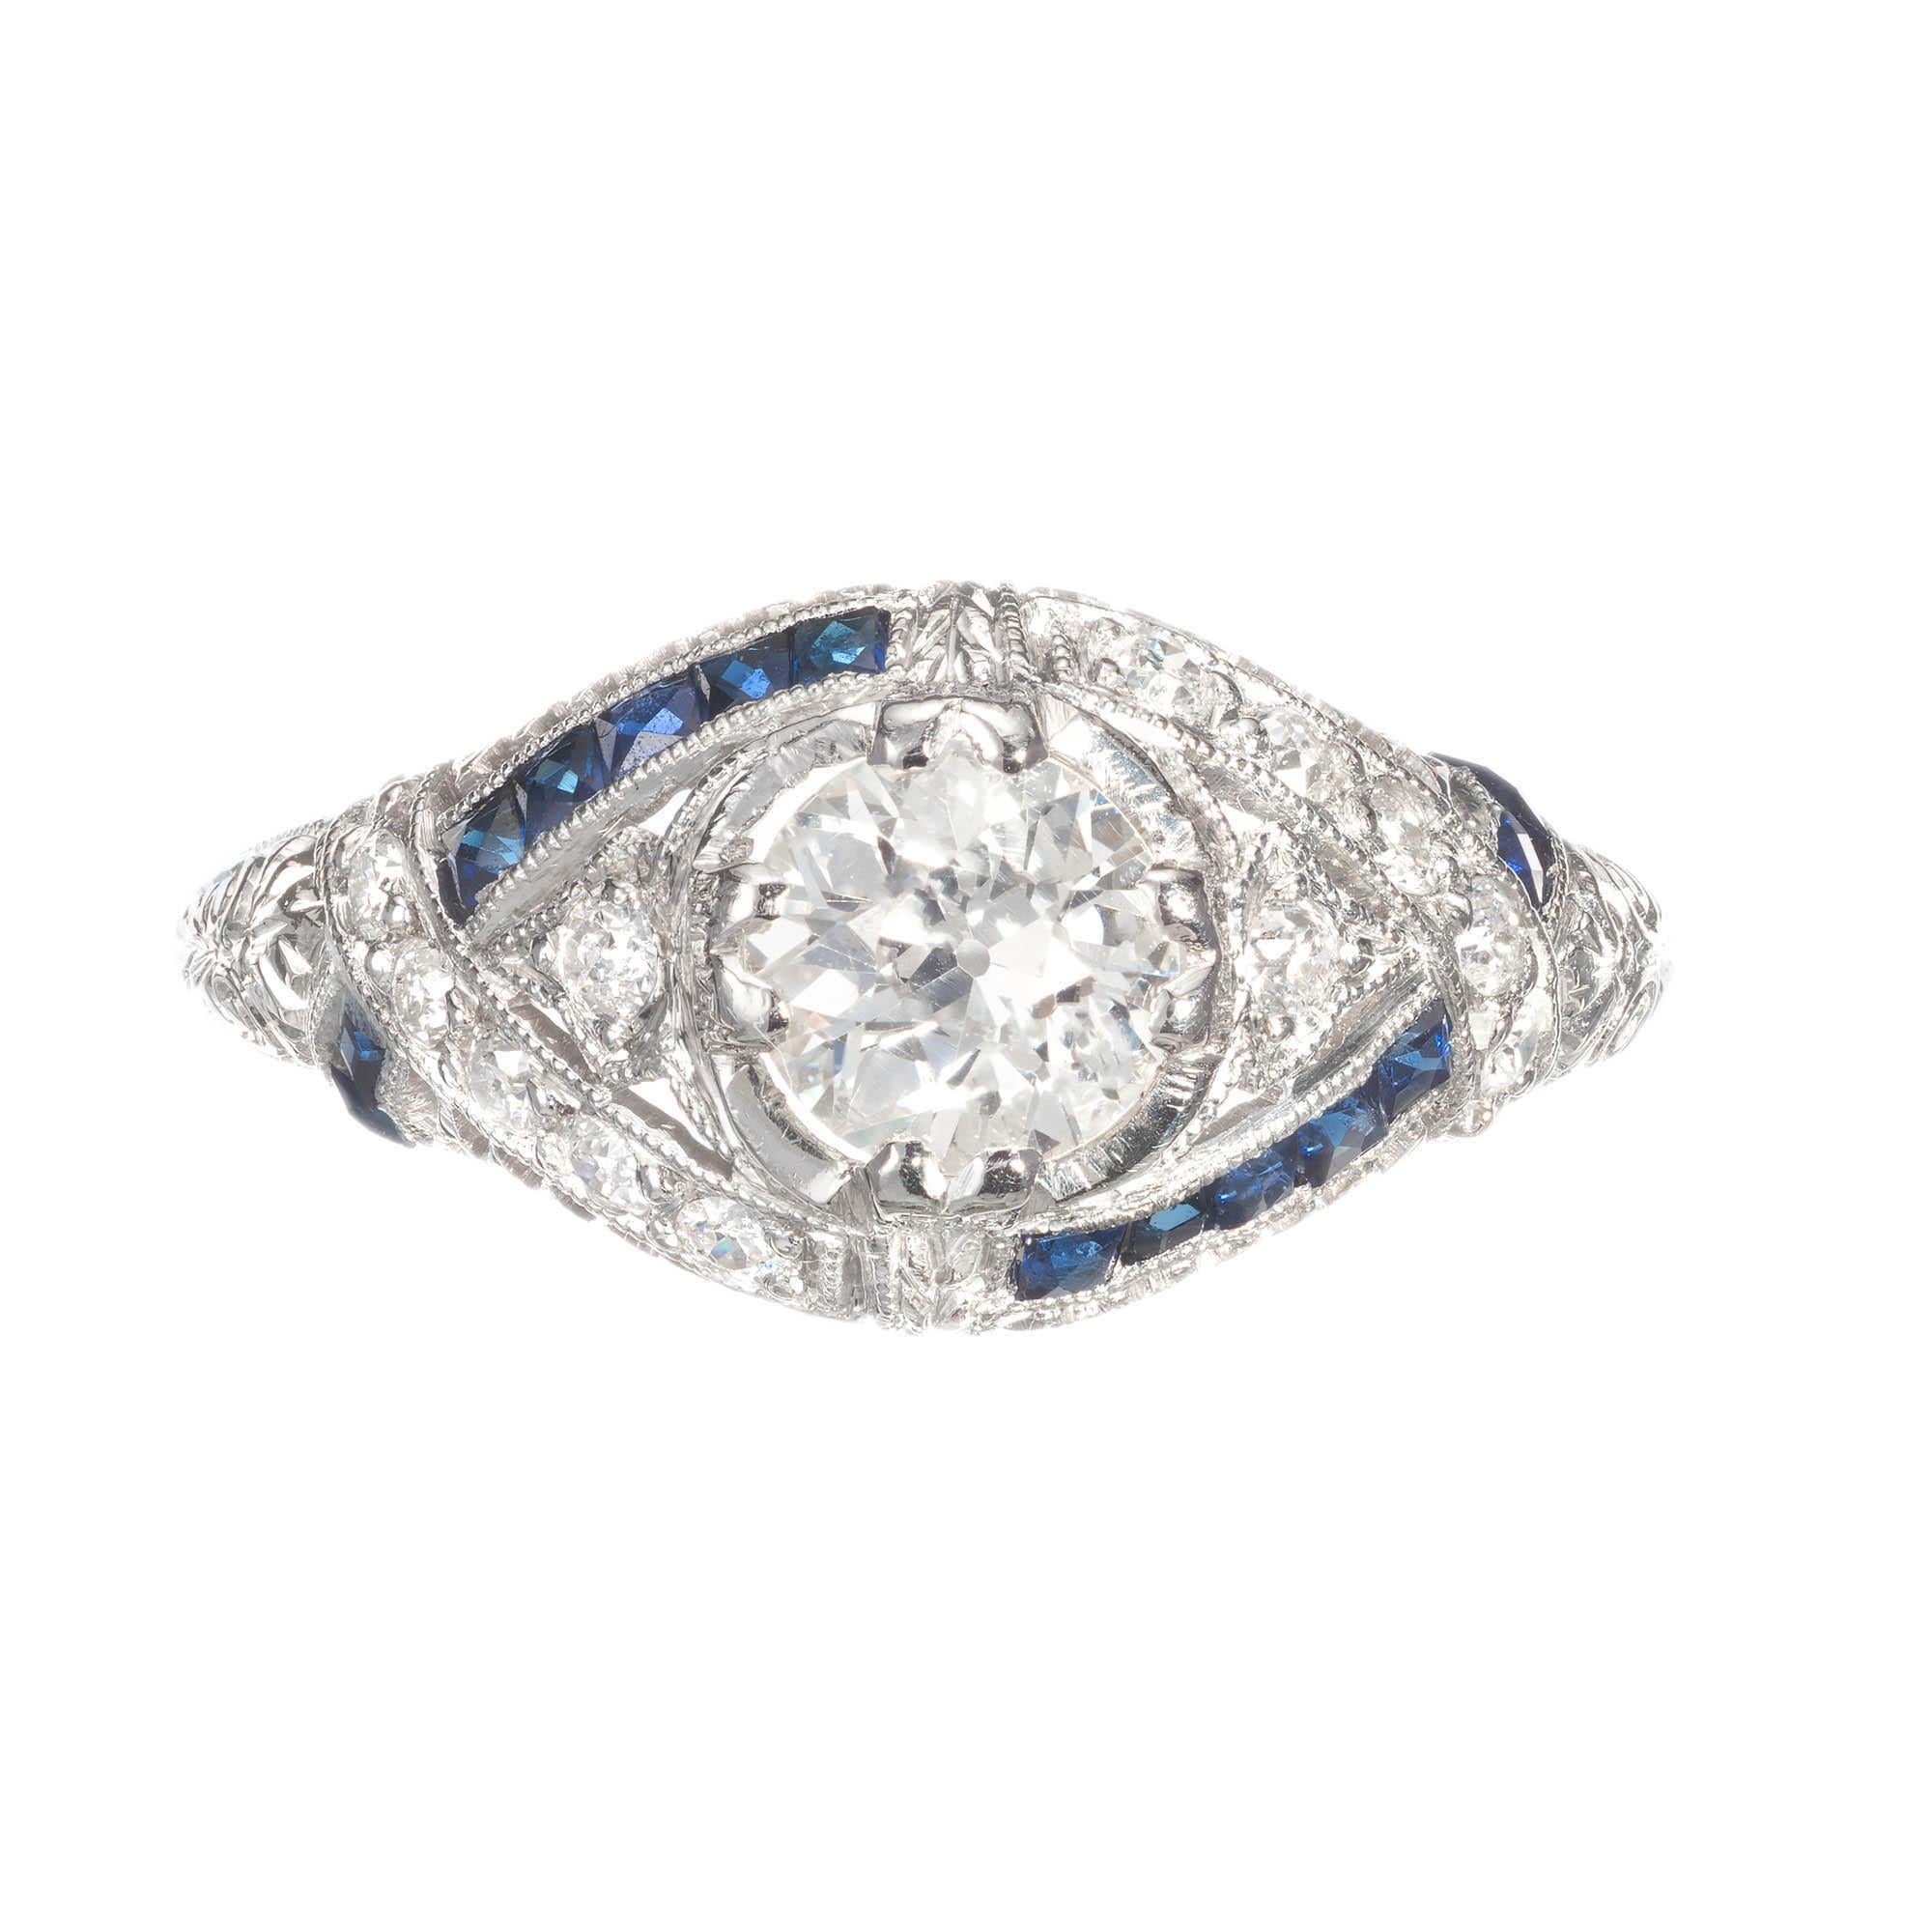 Art deco 1930s diamond pierced and engraved platinum engagement ring. Old European cut diamond with raised crown and small table for extra sparkle. French cut channel set sapphires and round diamonds accent the center stone. 

1 old European cut